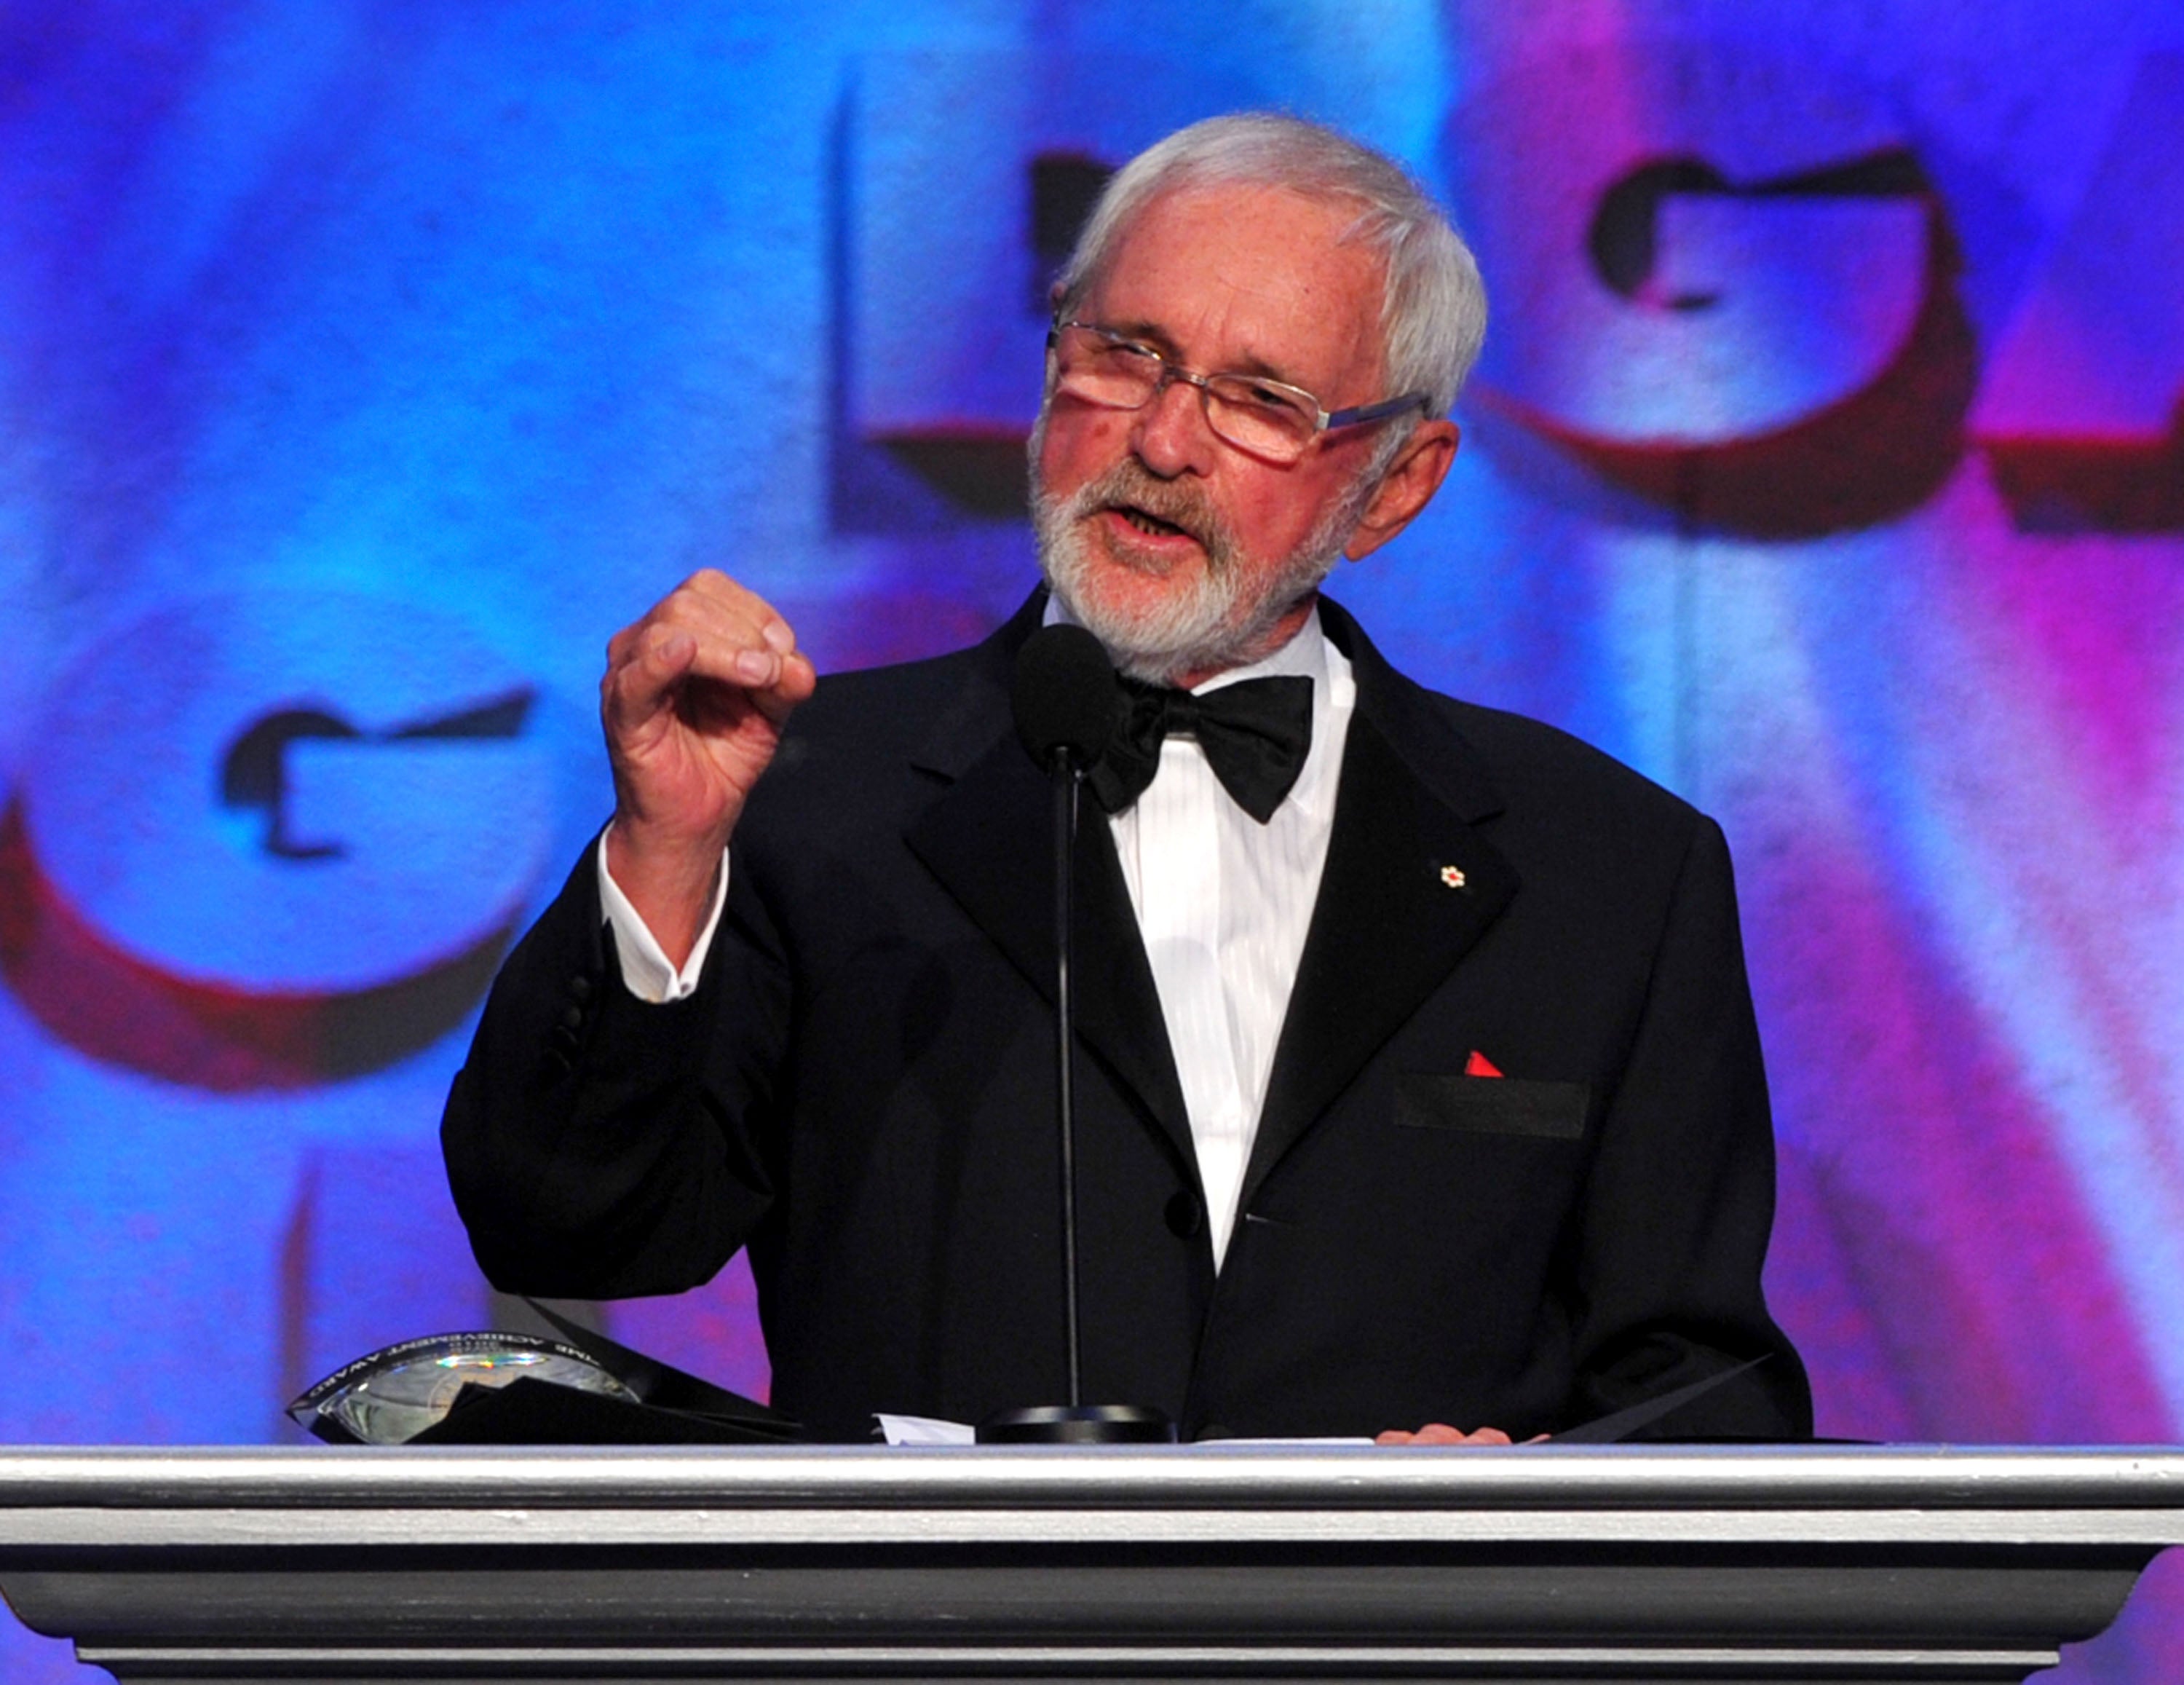 Norman Jewison receives a Lifetime Achievement Award from the Directors Guild Of America in 2010